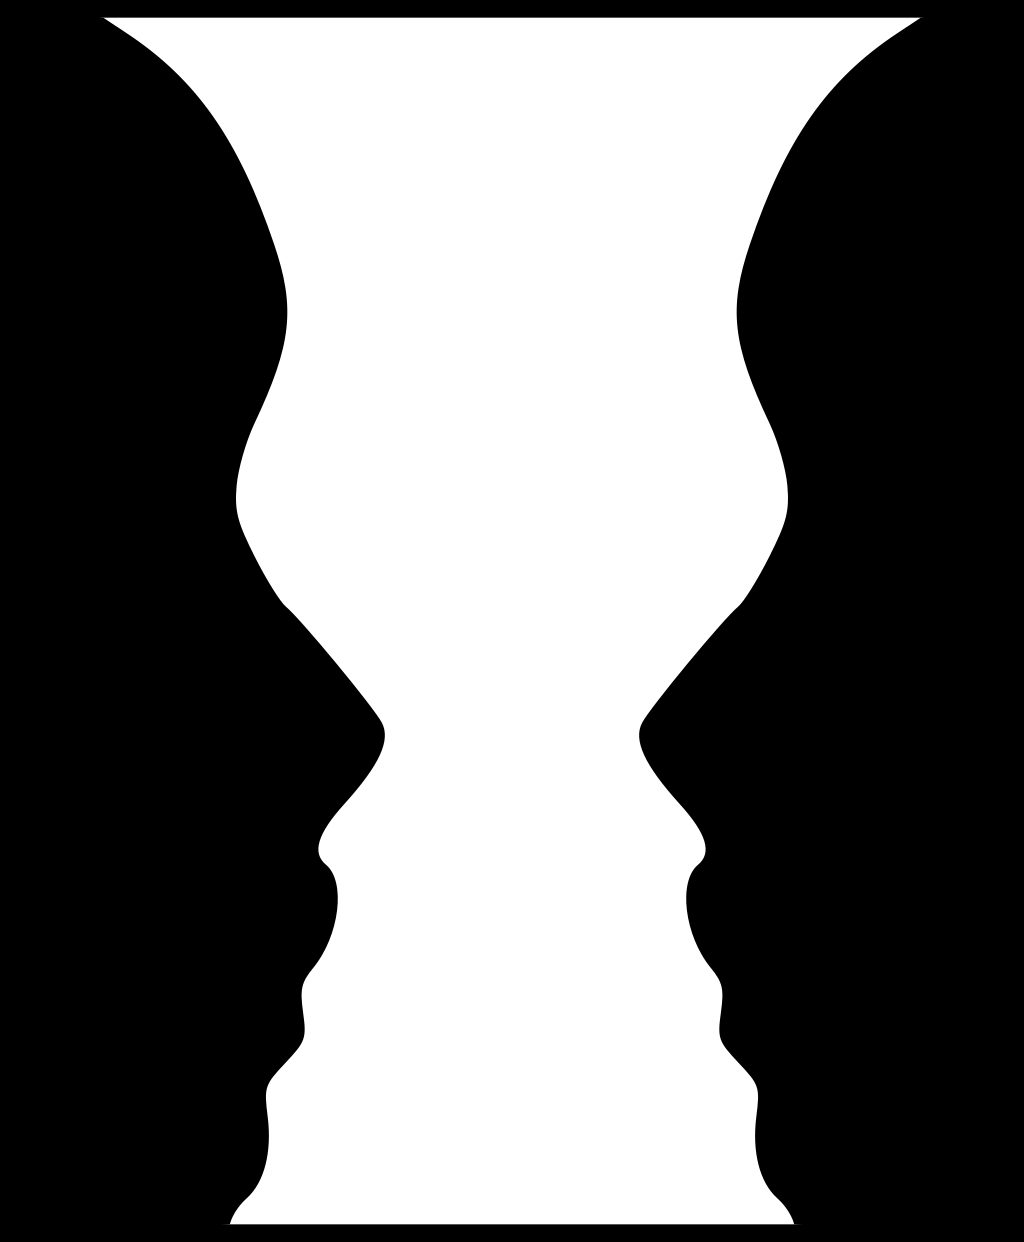 Focusing on the black portions, you see two faces looking at one another. Focusing on the white reveals a vase.